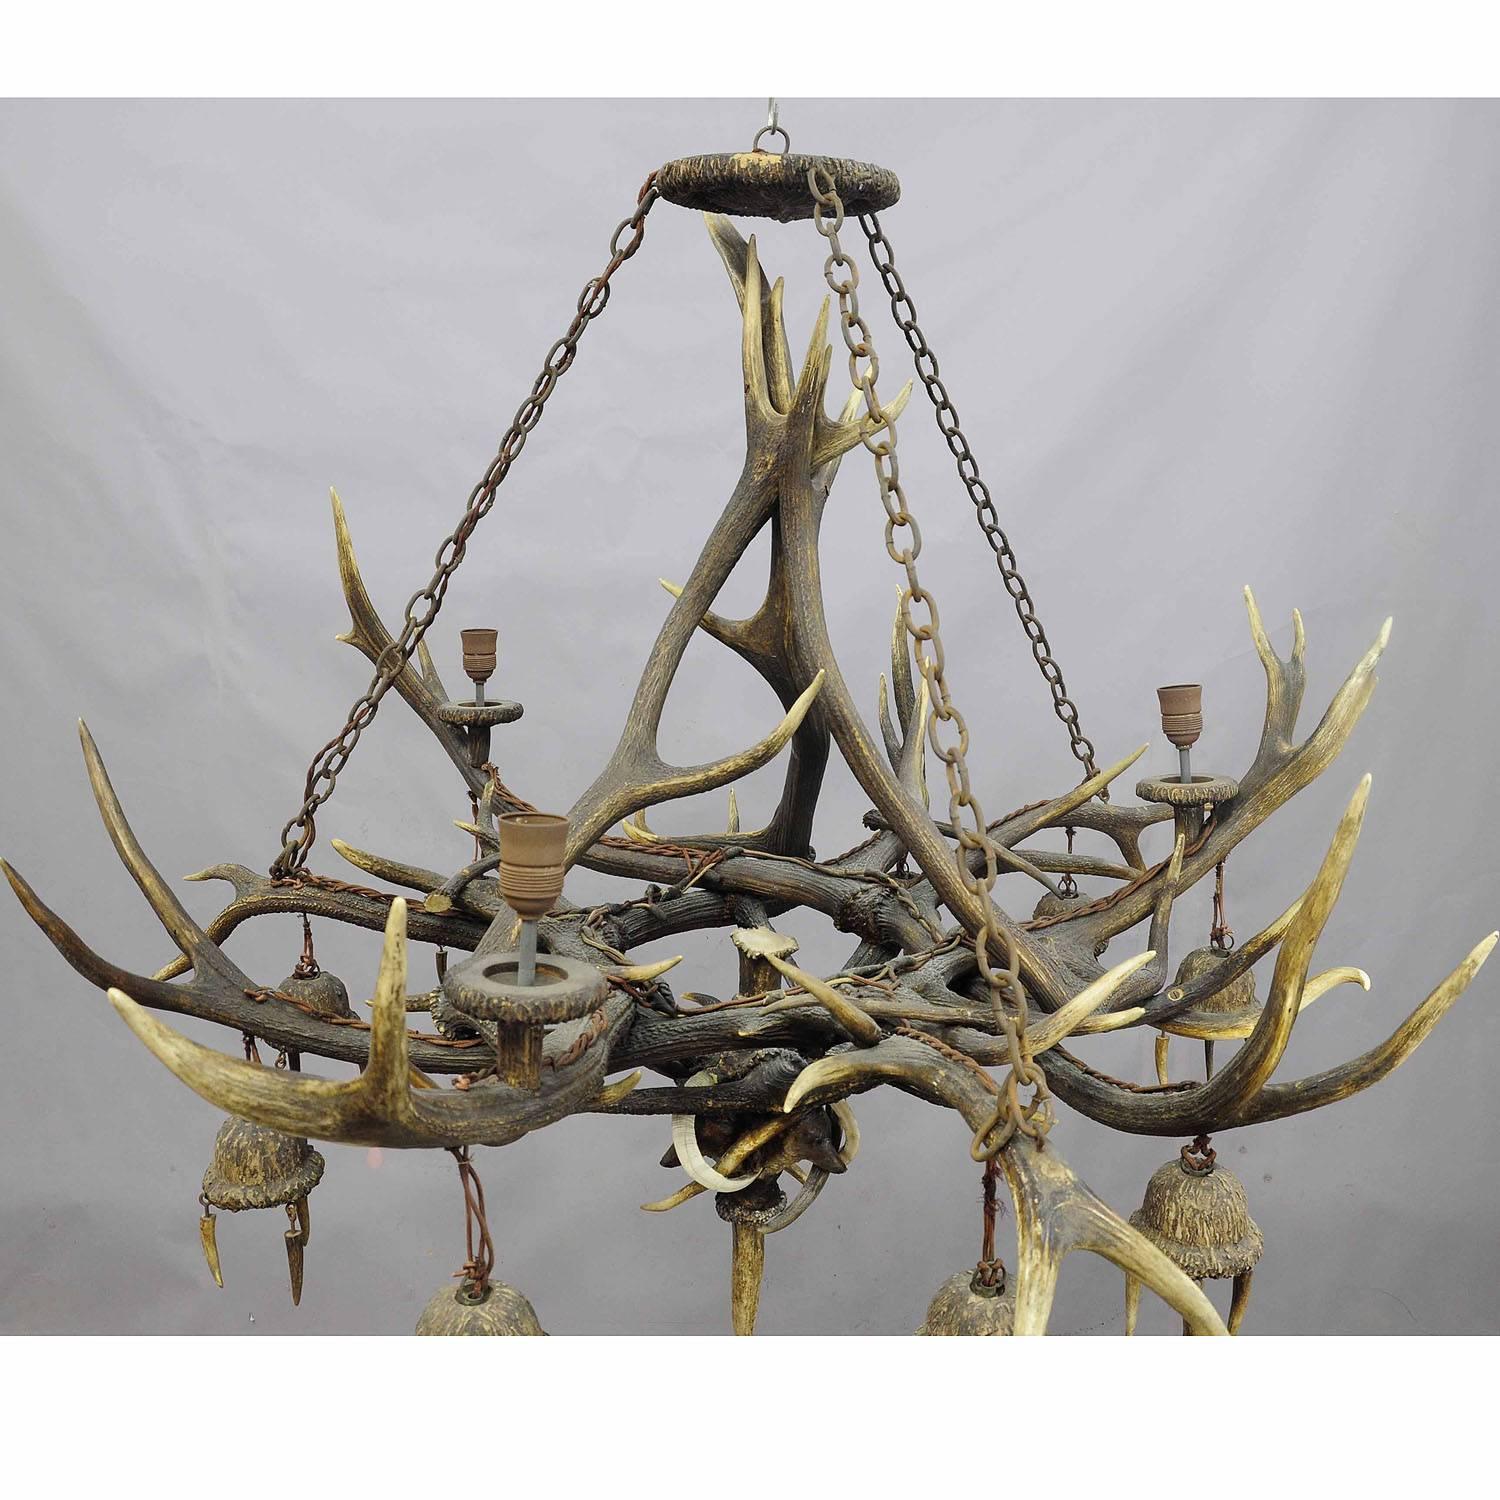 An impressive rustic antler chandelier. Manufactured from several stag and deer antlers, circa 1880. On the lower part decorated with three fox heads and wild boar tusks. Nine hanging fixtures made of wood and plaster, three fixtures on the top. A